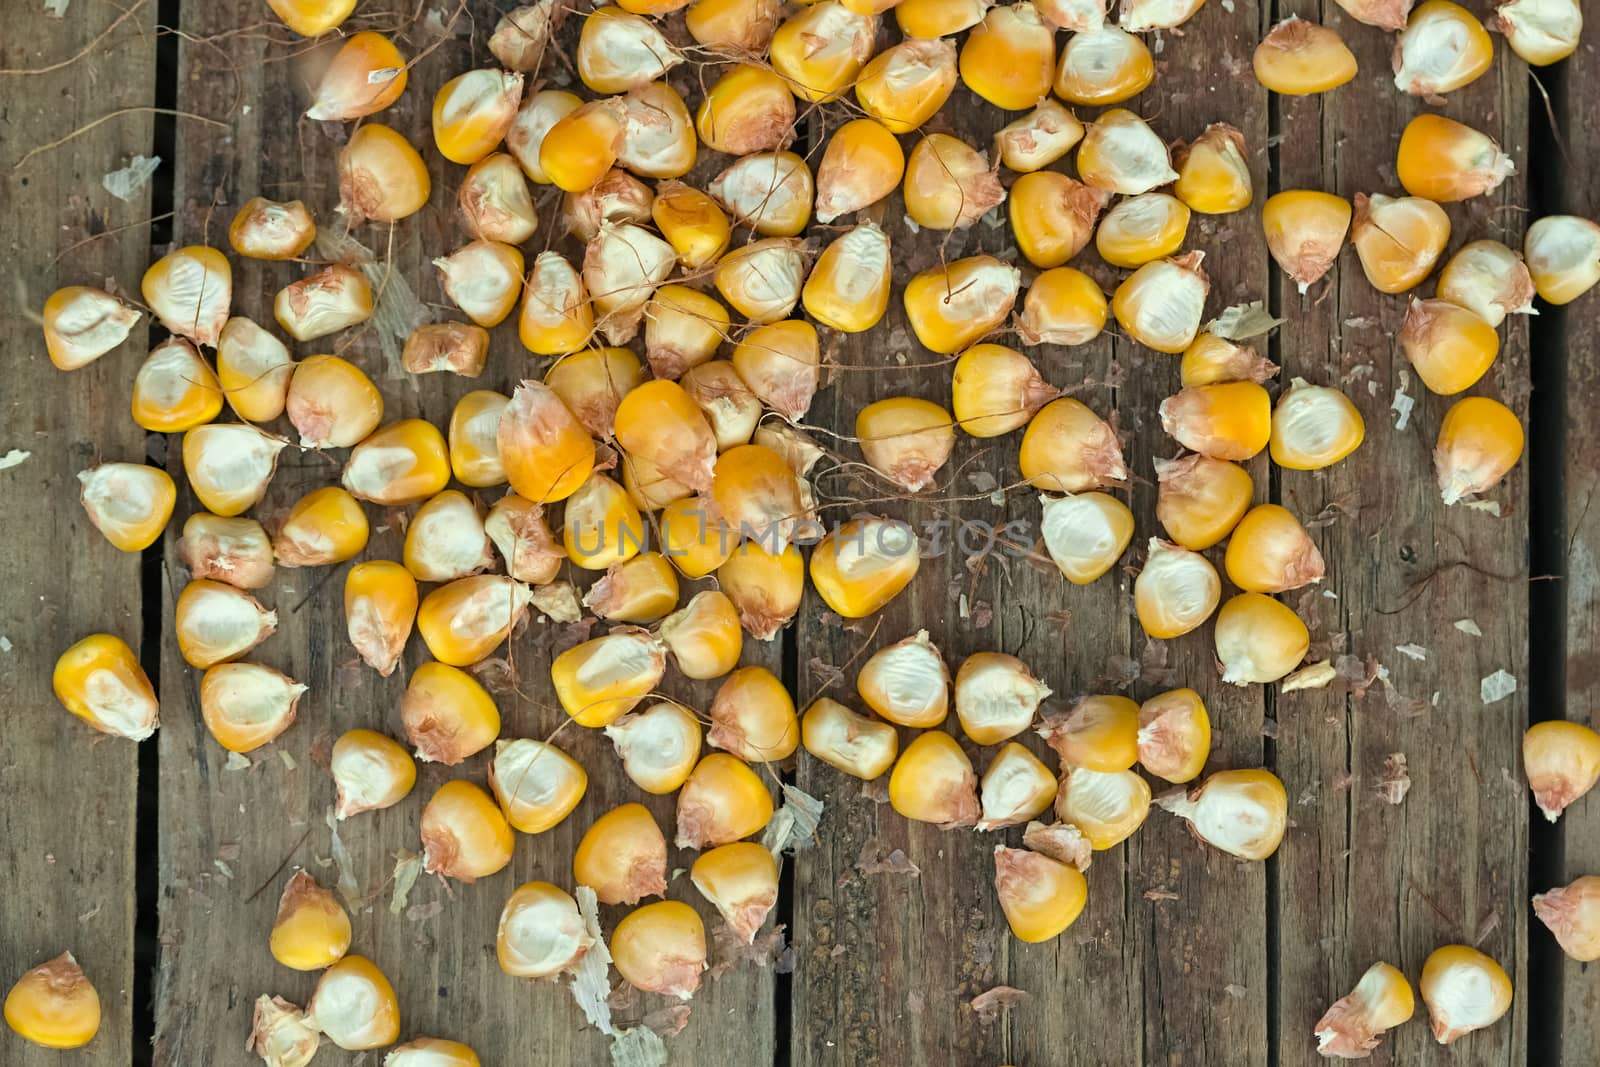 Randomly scattered ripe yellow corn on the rough wooden background. Close up image. Top view.